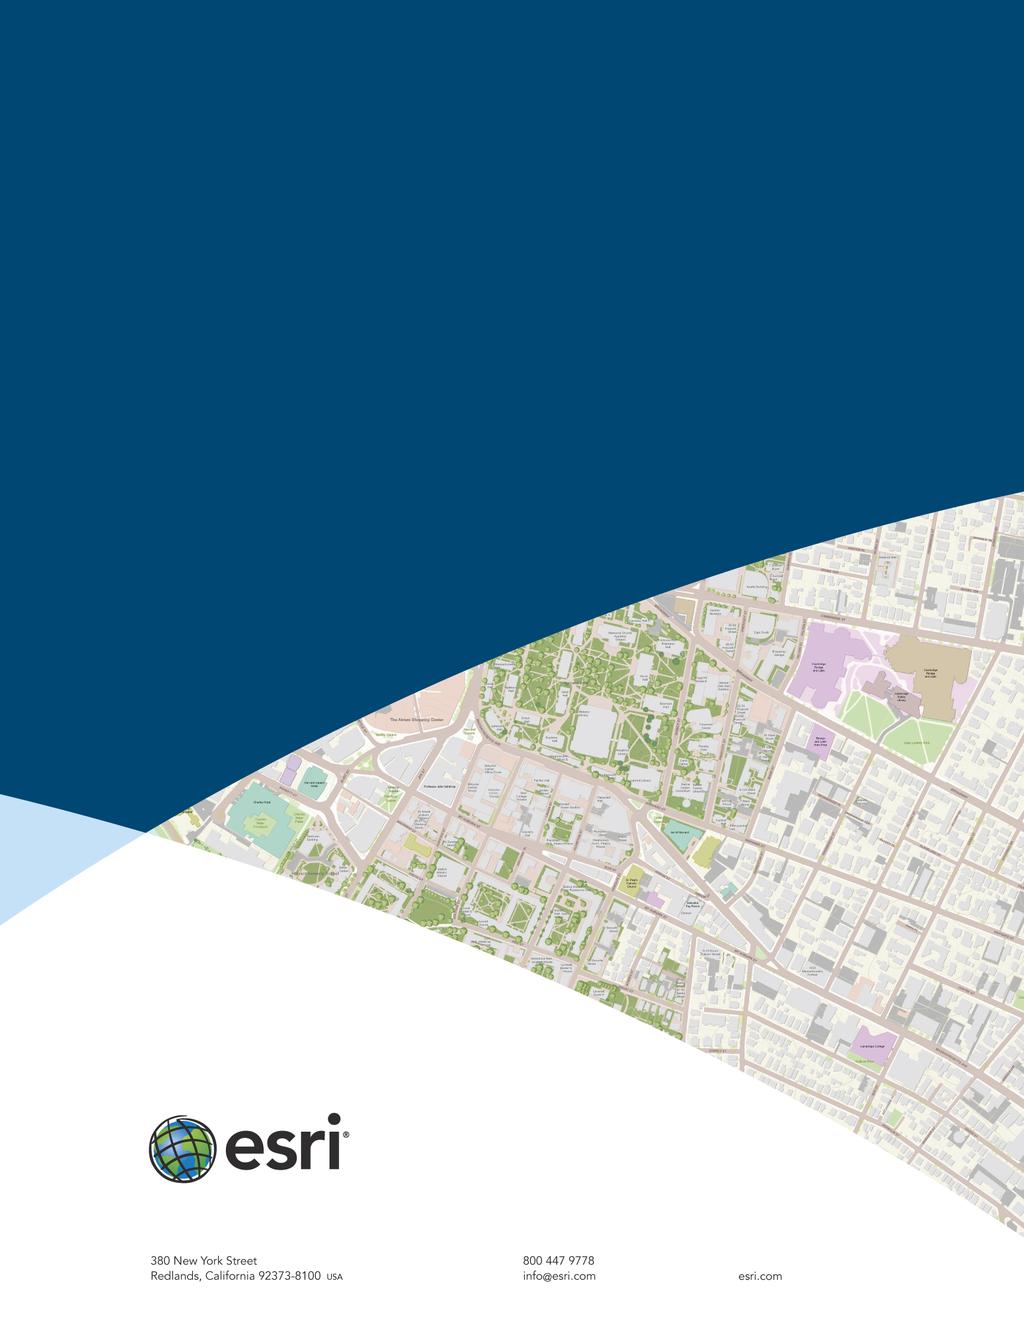 ArcGIS 10.5.1, ArcGIS Pro 2.0, and ArcGIS Earth 1.